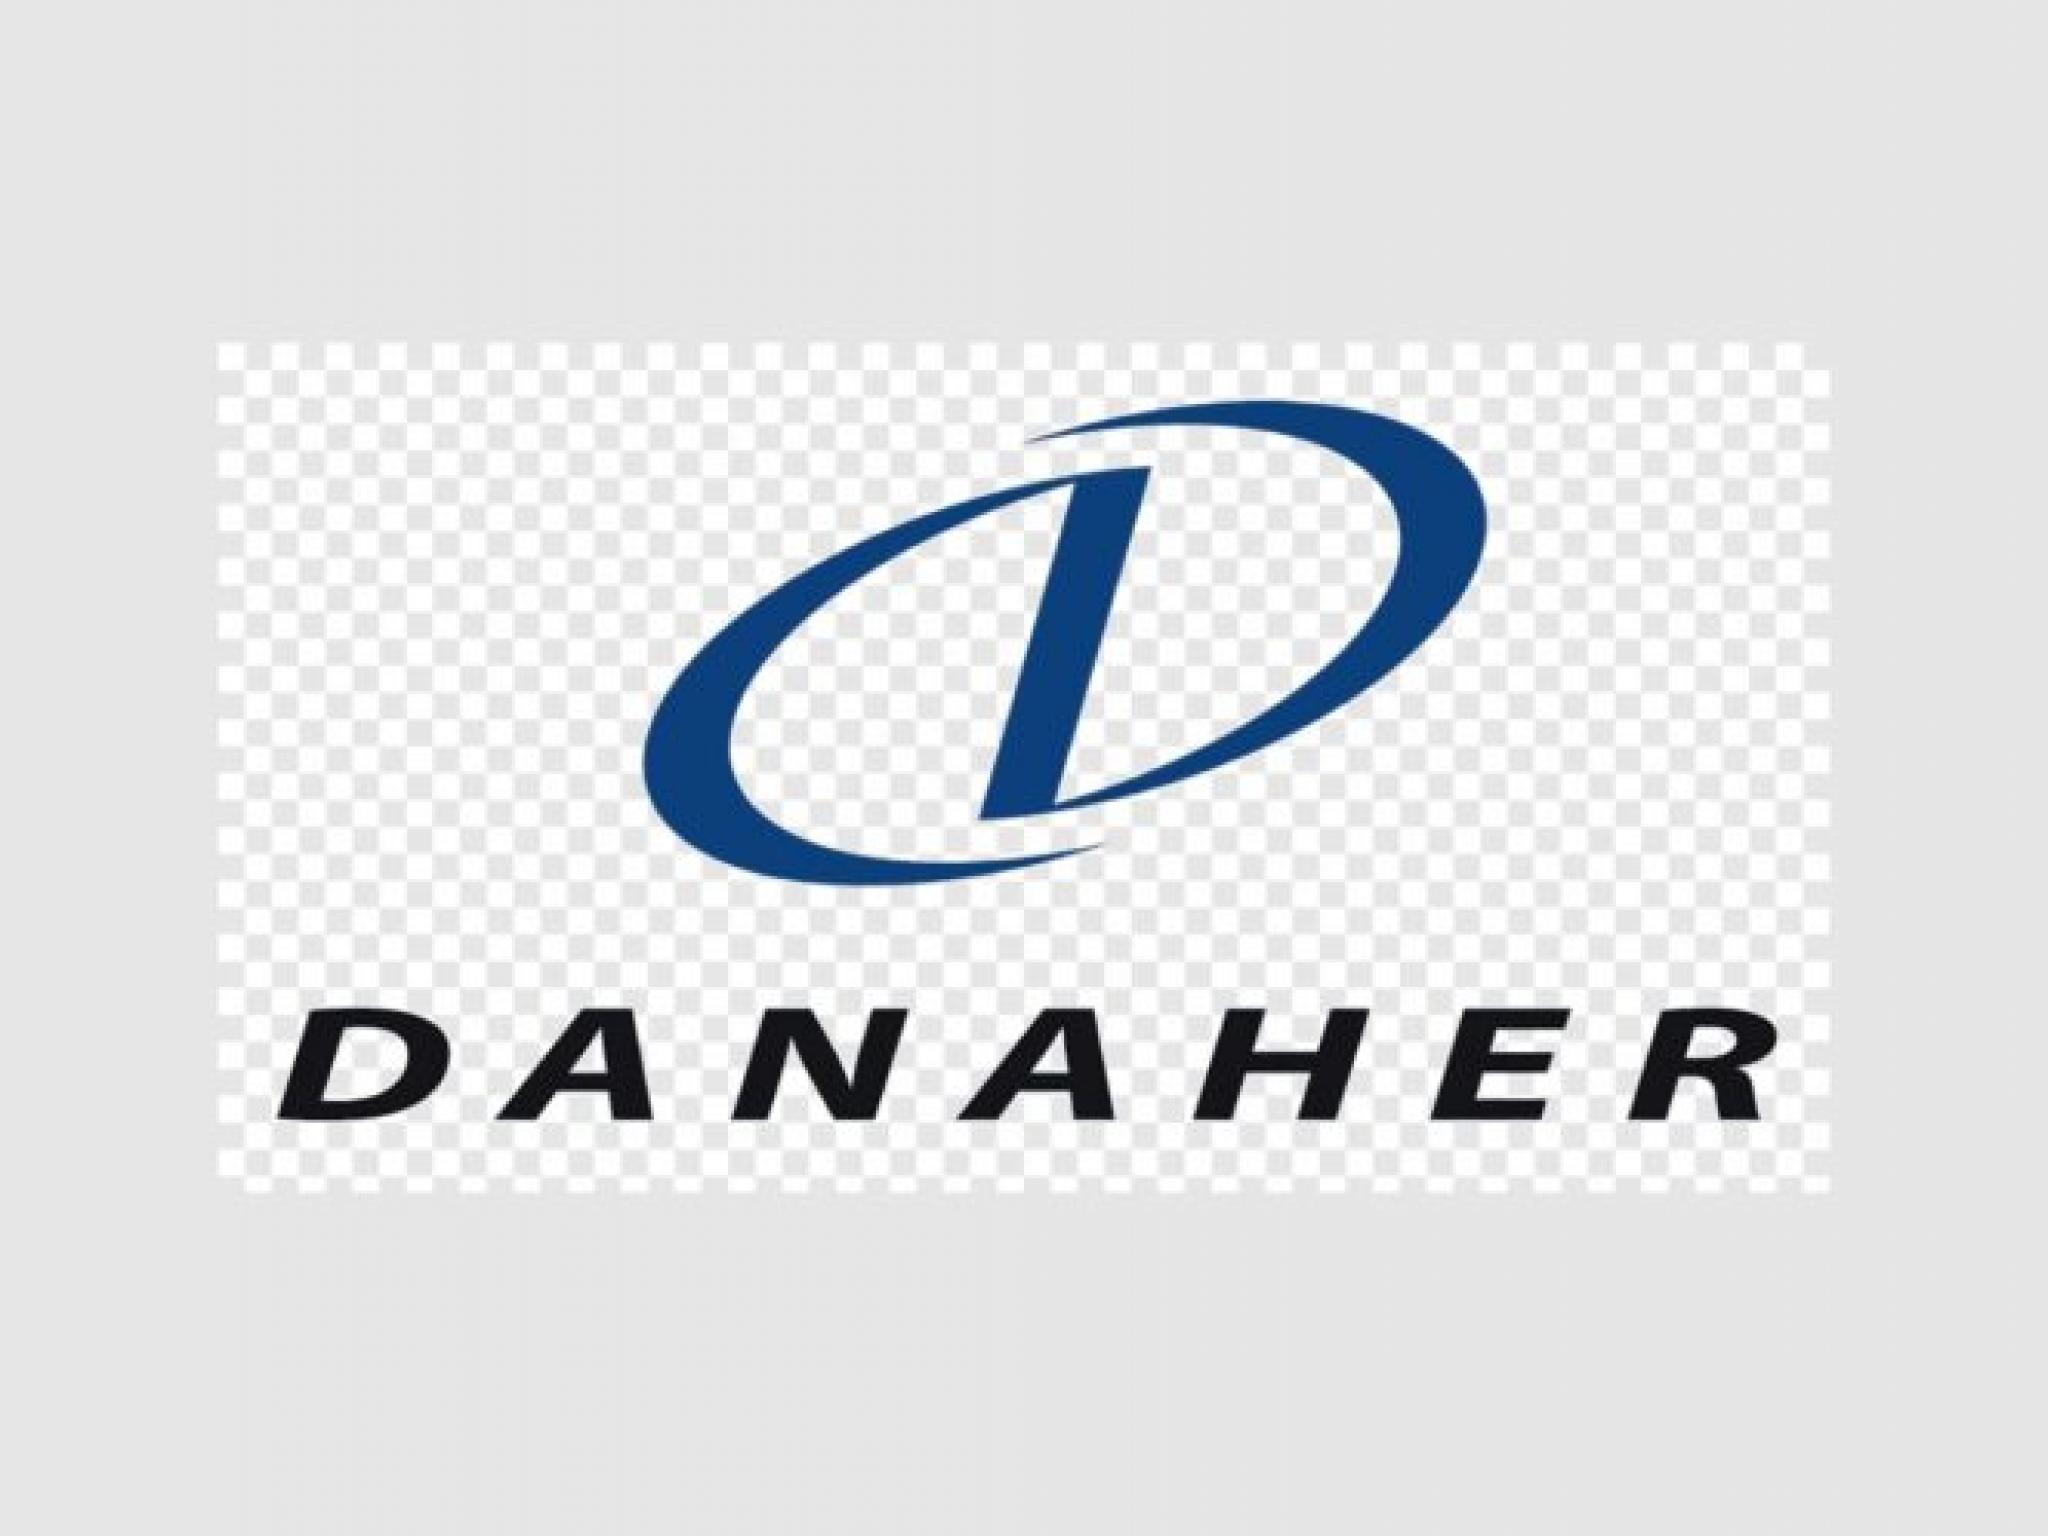  danaher-posts-upbeat-earnings-joins-spotify-msci-owens--minor-and-other-big-stocks-moving-higher-on-tuesday 